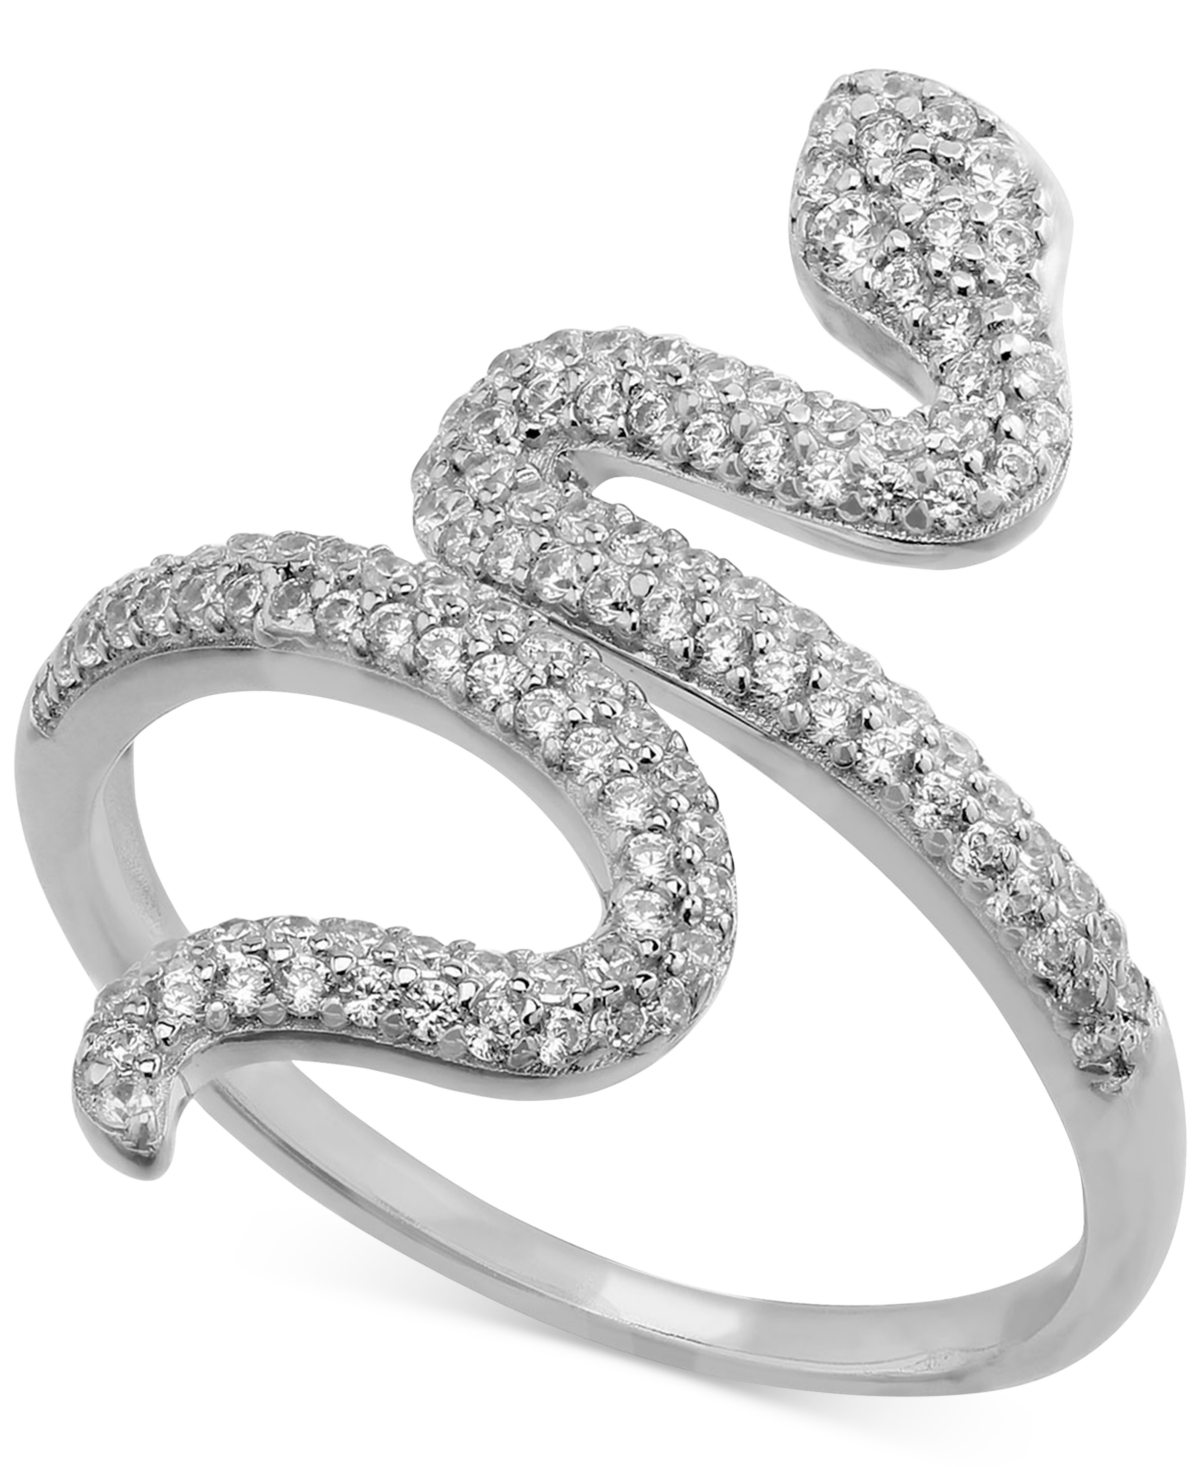 Cubic Zirconia Snake Ring in Sterling Silver, Created for Macy's - Sterling Silver